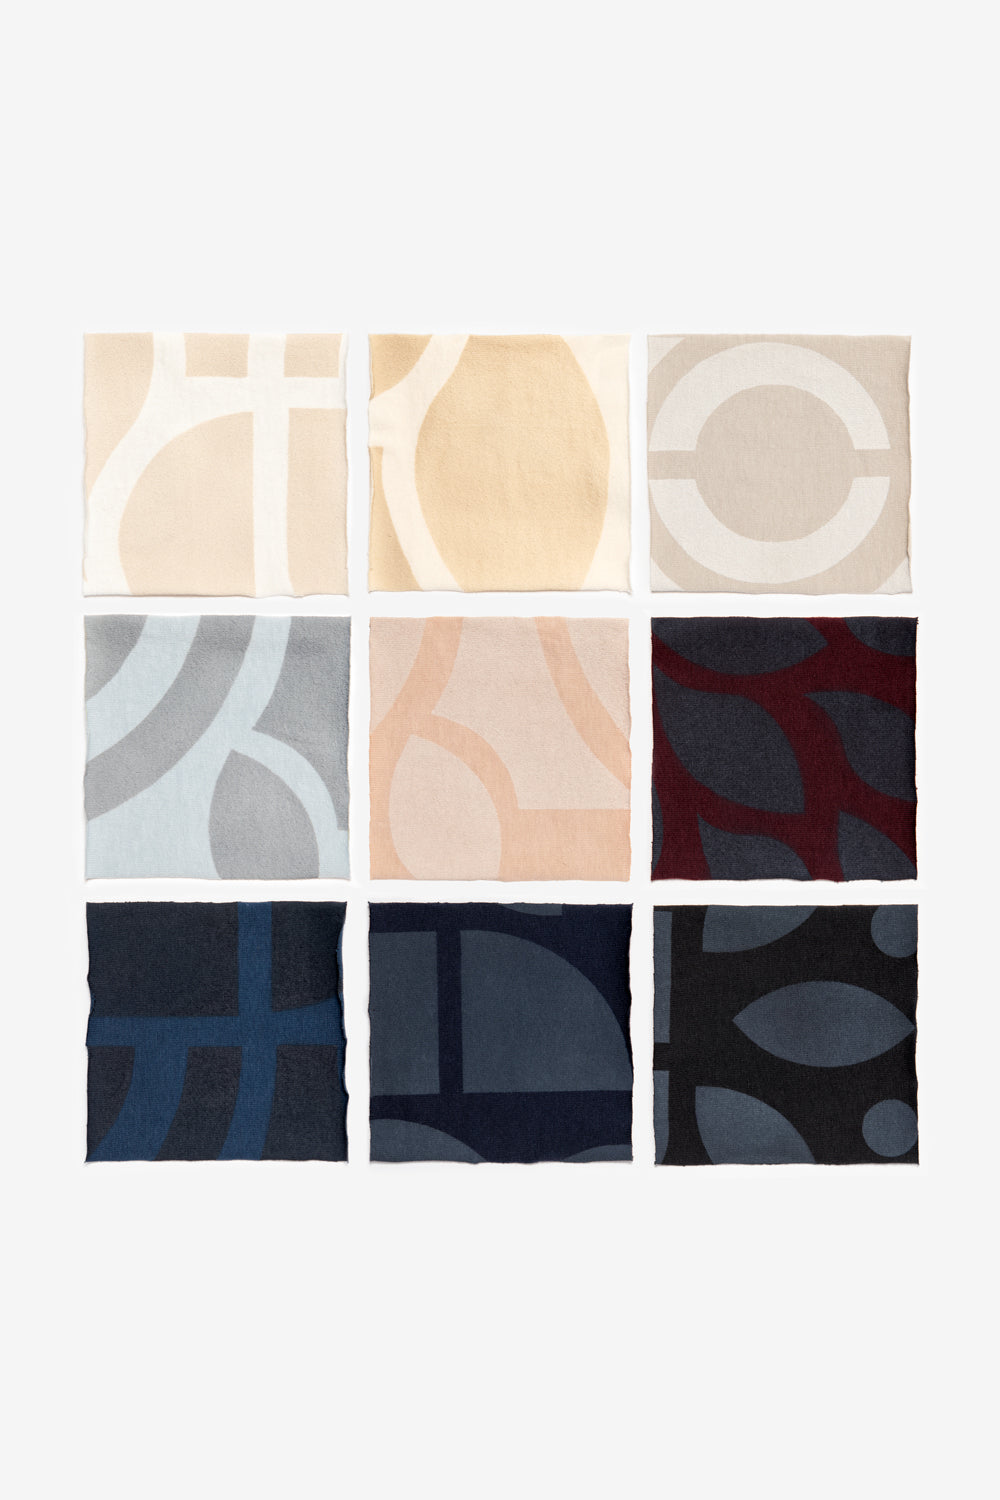 Fabric samples in various colors, stenciled with the Abstract Stencil.